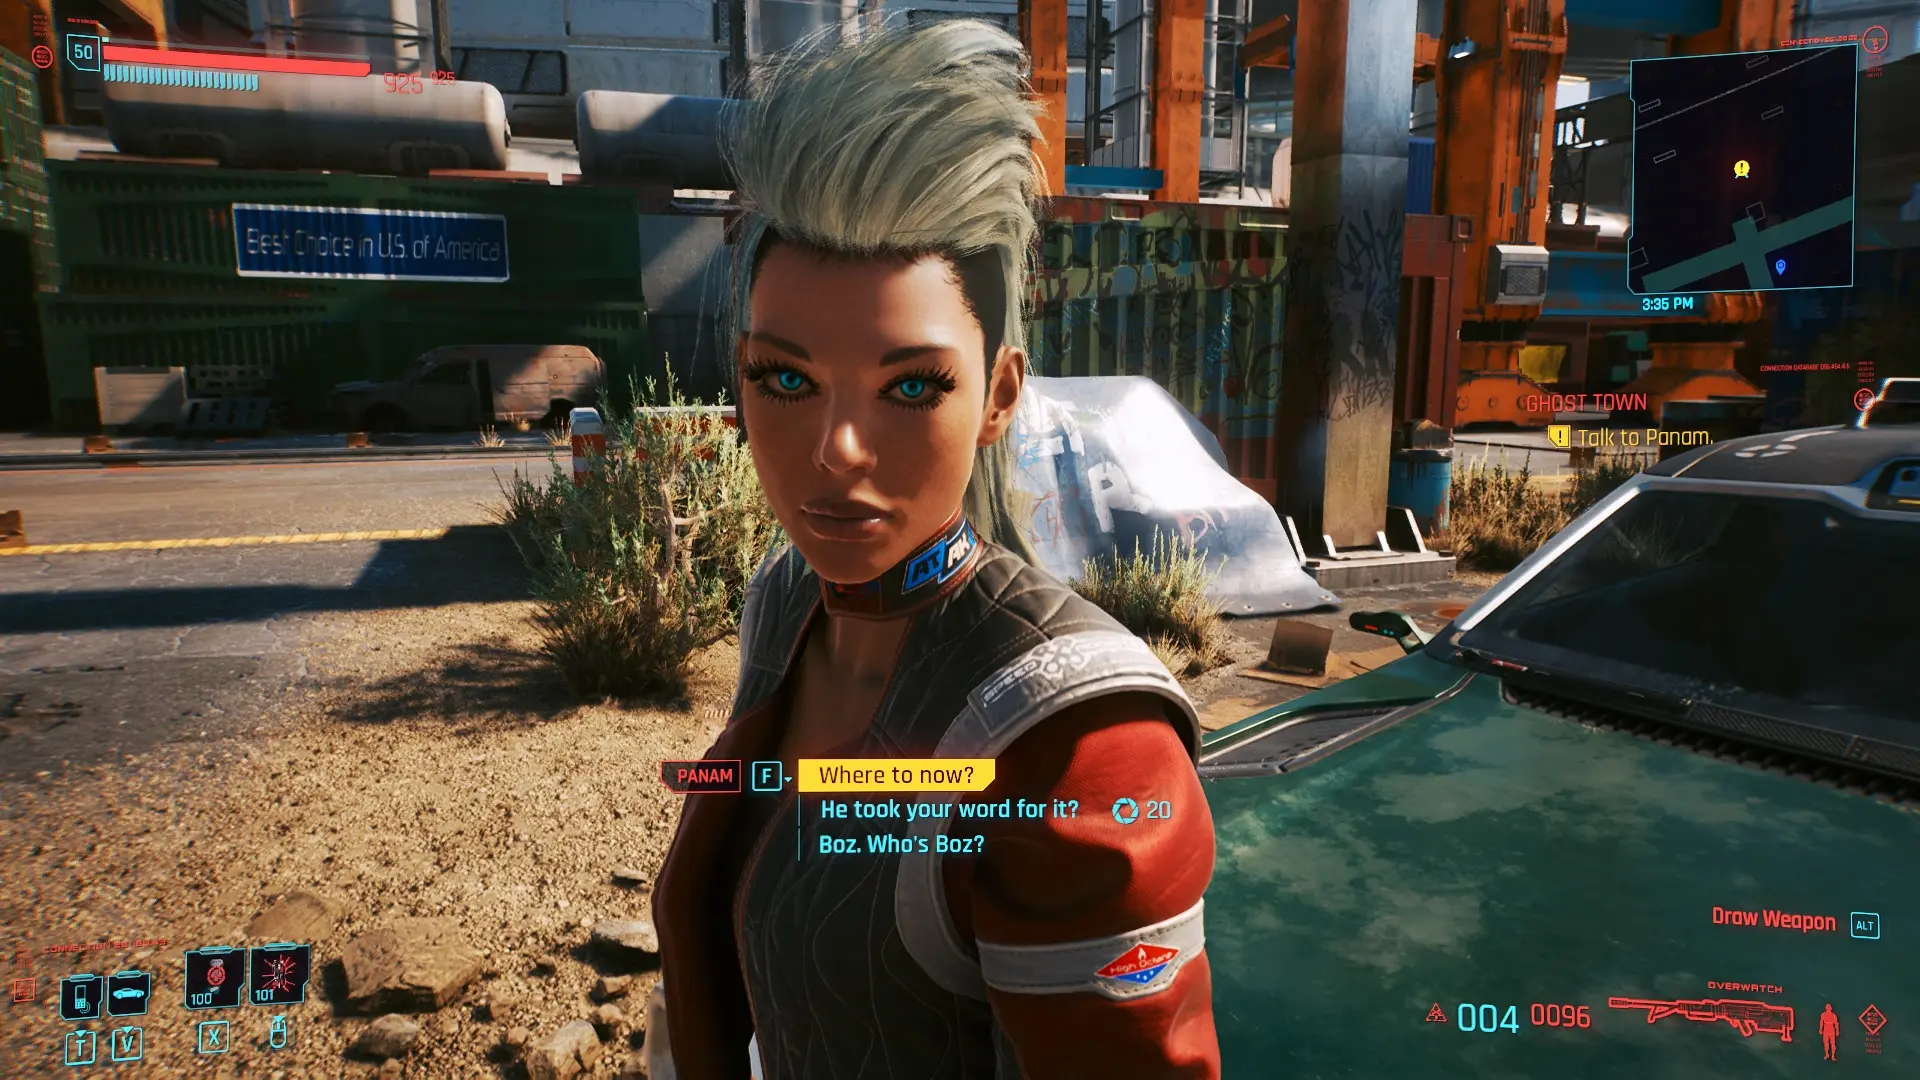 Panam Alternate Face And Hair Mod Wip At Cyberpunk 2077 Nexus Mods And Community 5098